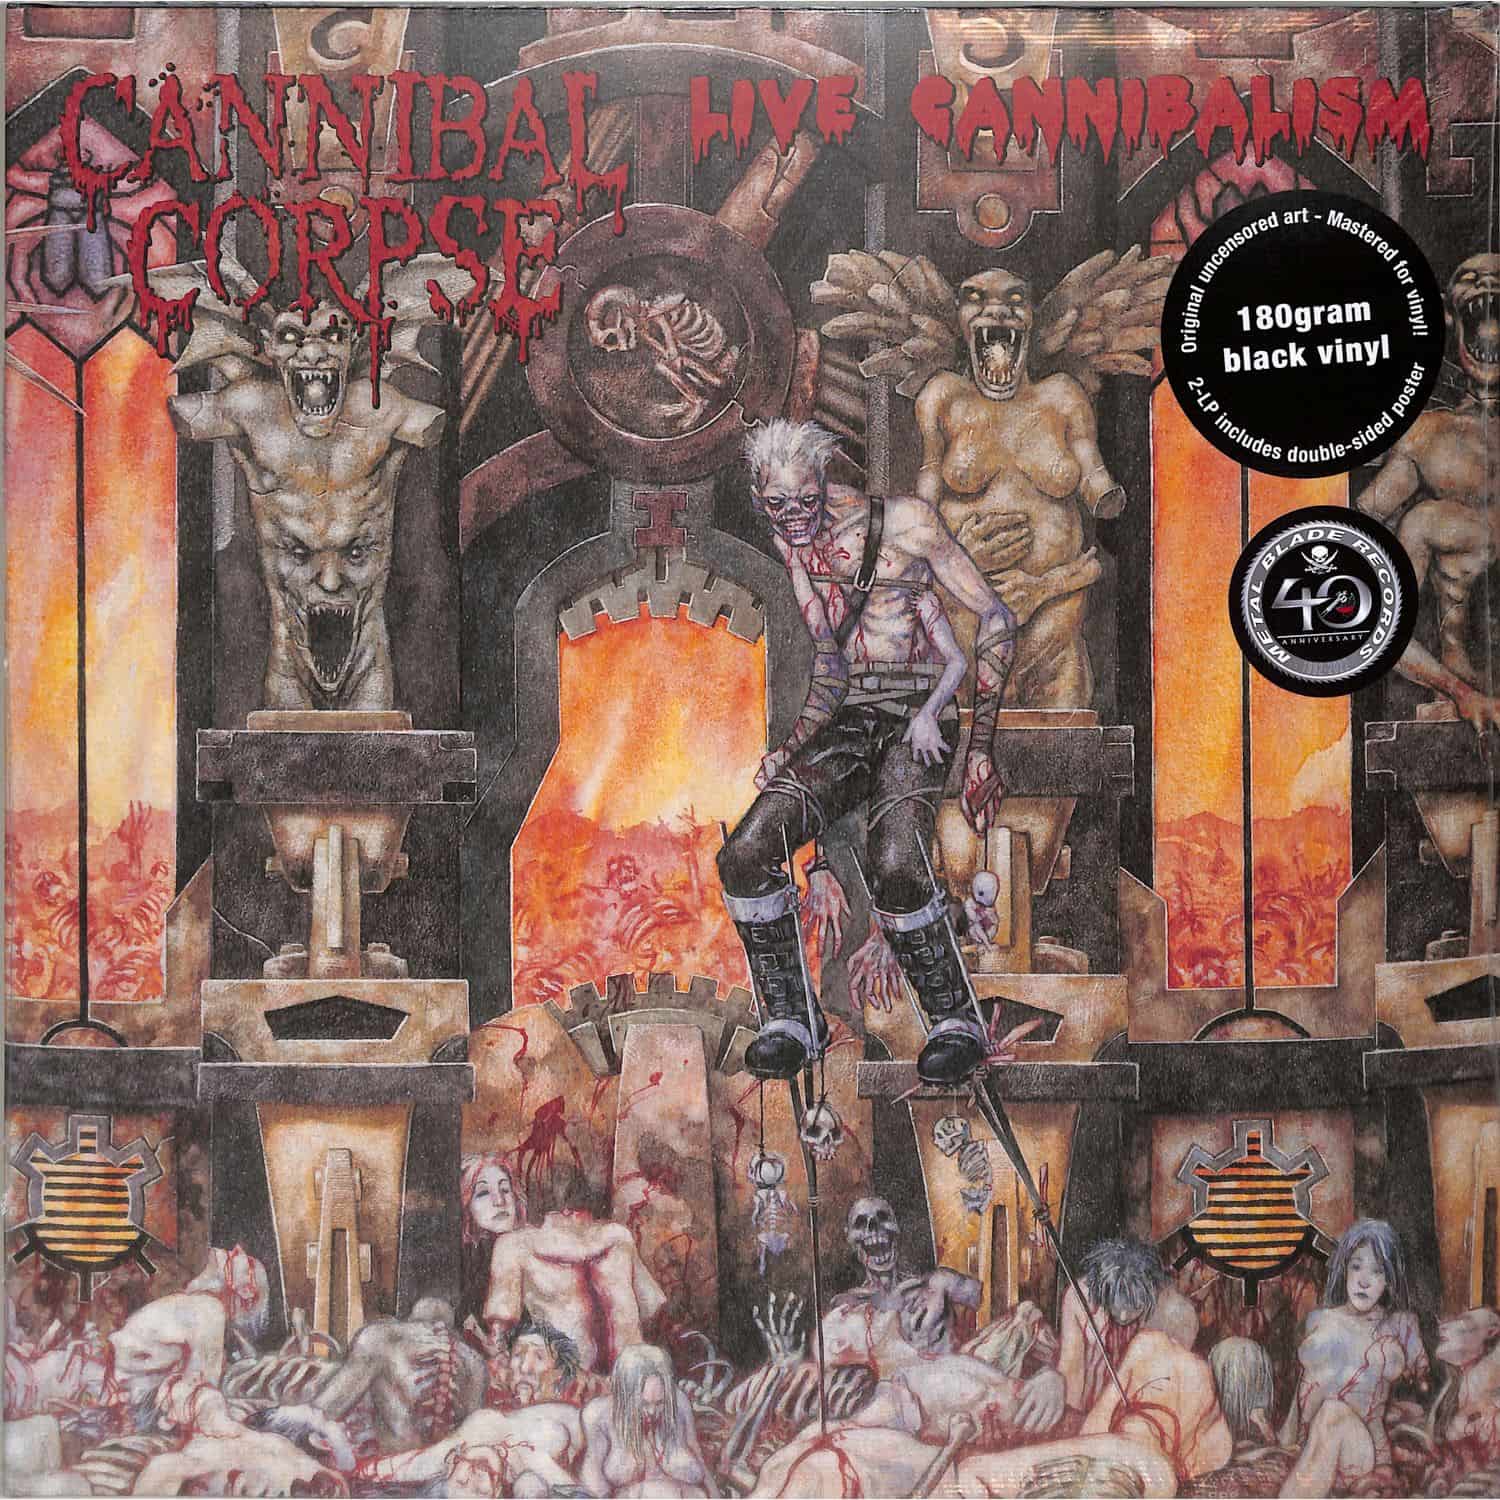 Cannibal Corpse - LIVE CANNIBALISM 